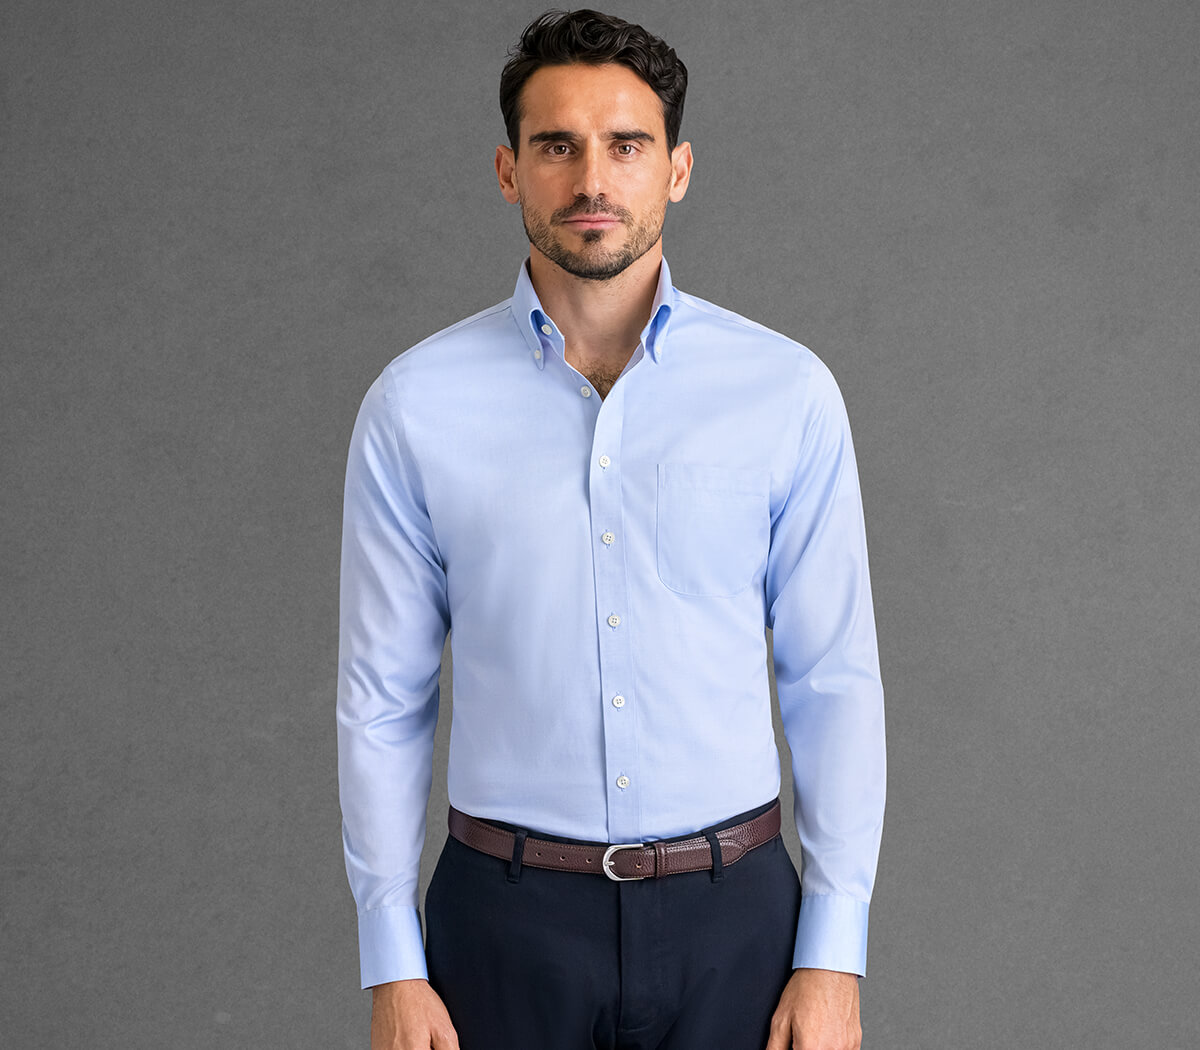 The Business Shirt Guide | Best shirts for the office - Proper Cloth